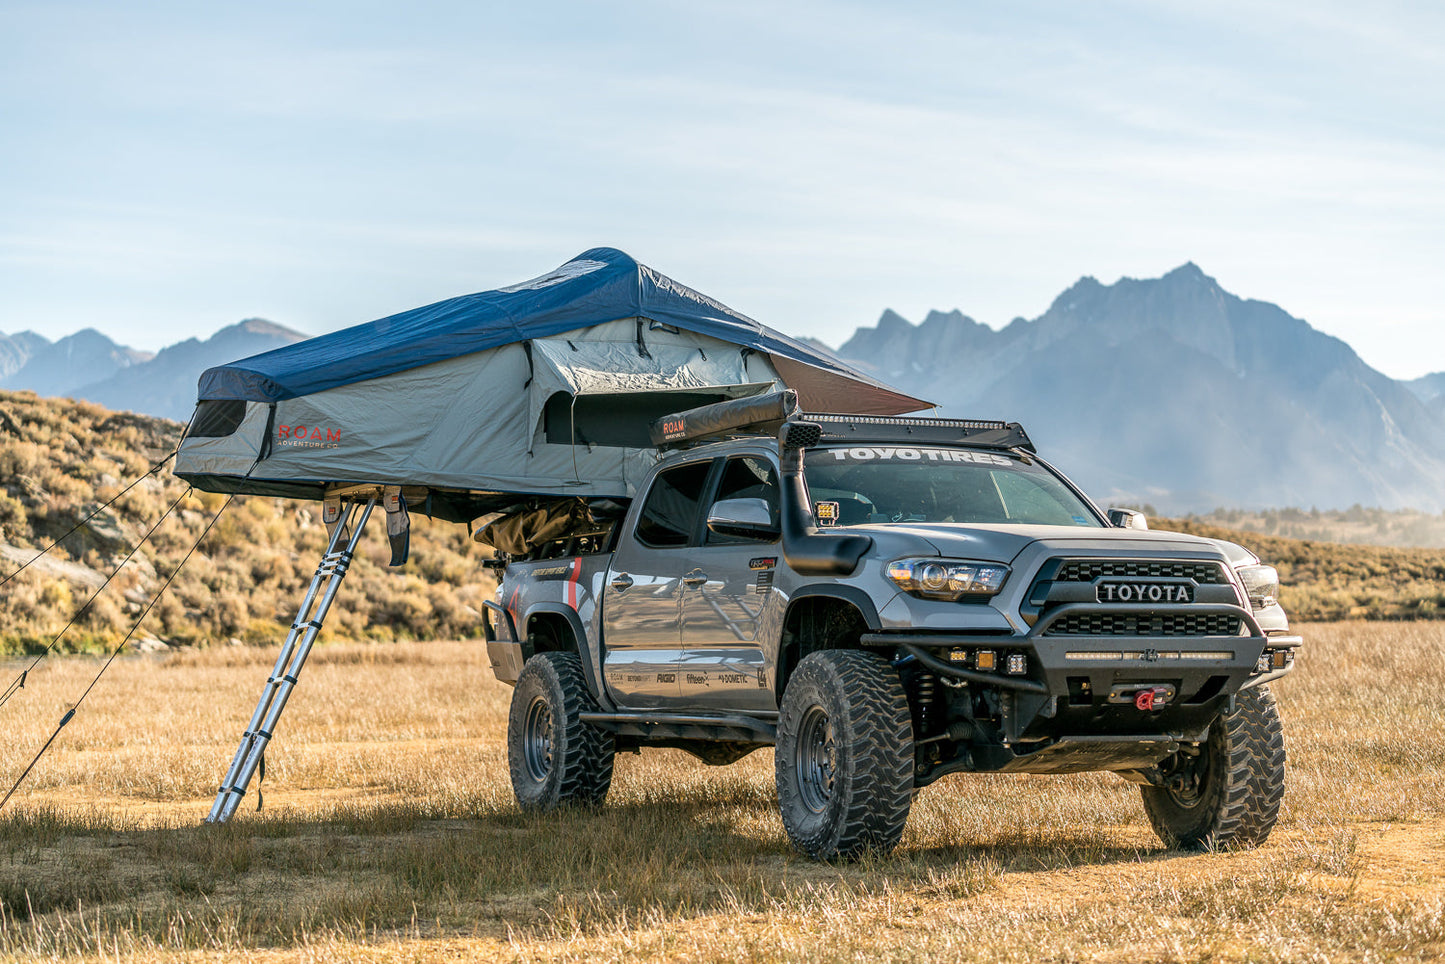 Vagabond Rooftop Tent in Slate Grey Navy Blue shown on Toyota Tacoma